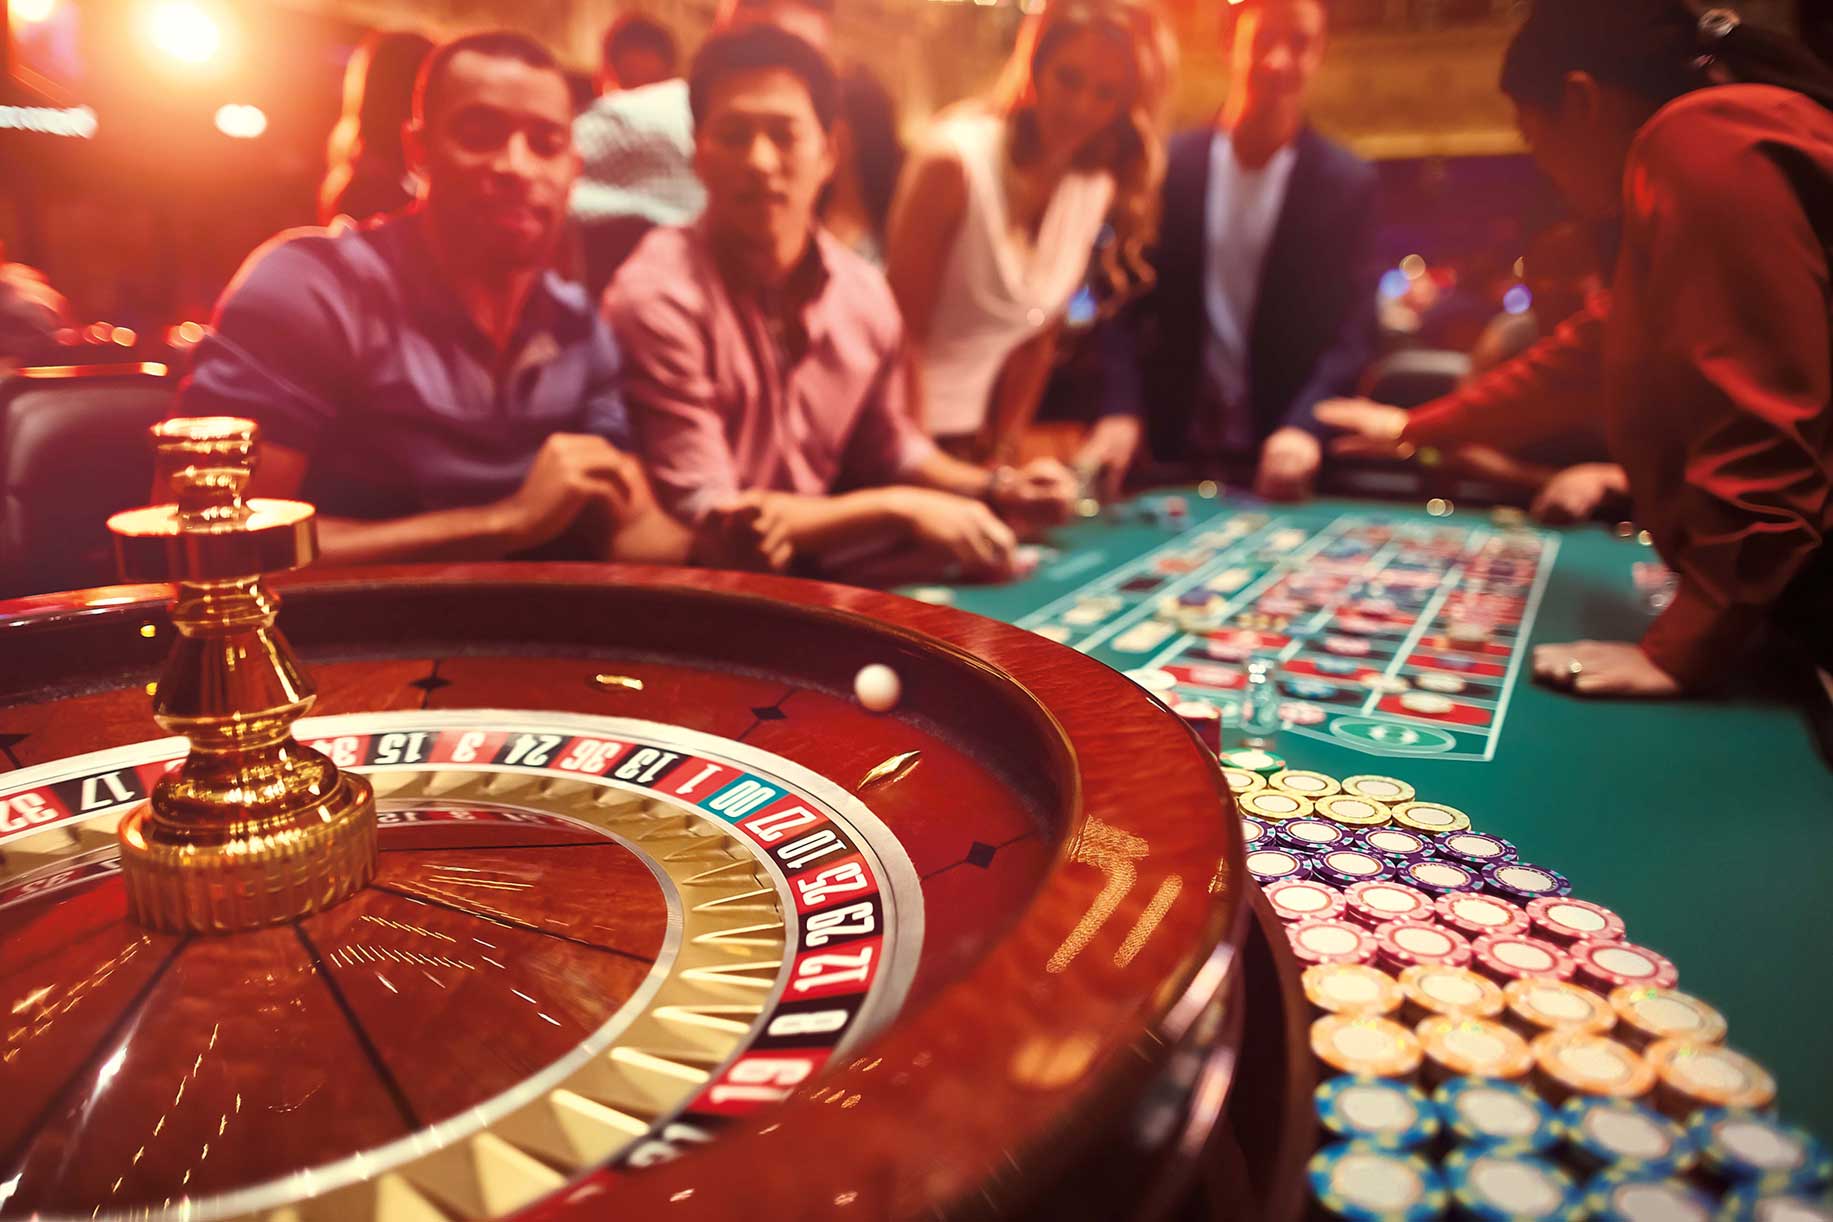 Humans Playing Roulette in a Casino Orange Halo